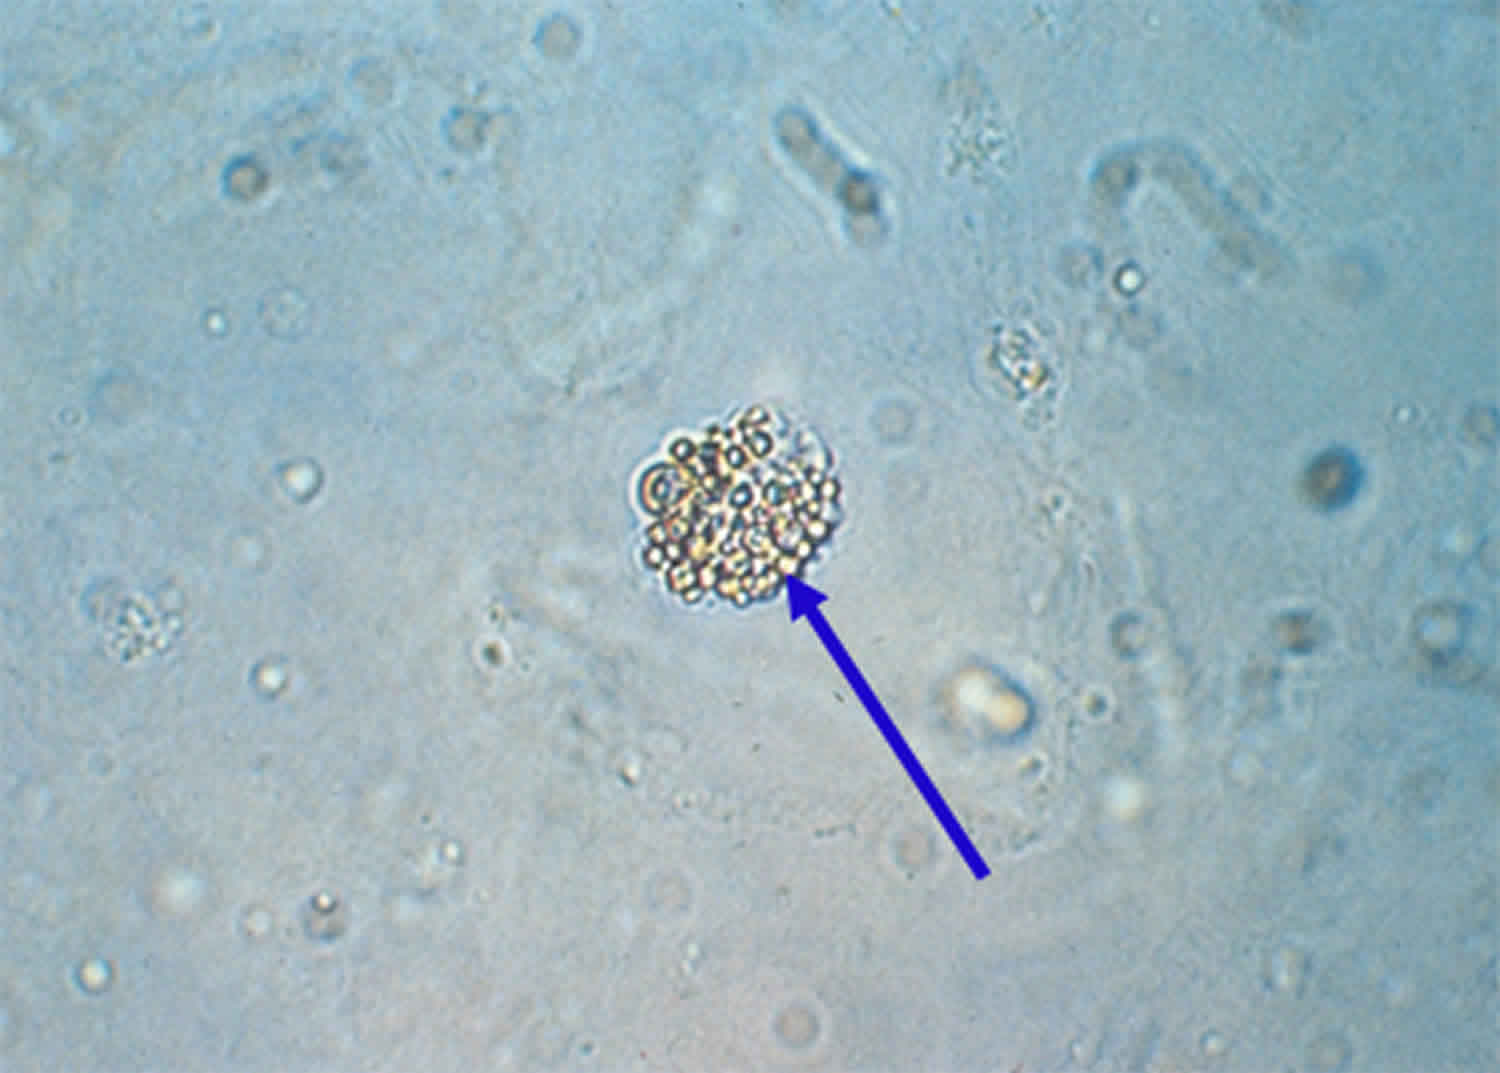 renal tubular epithelial cells with oval fat body